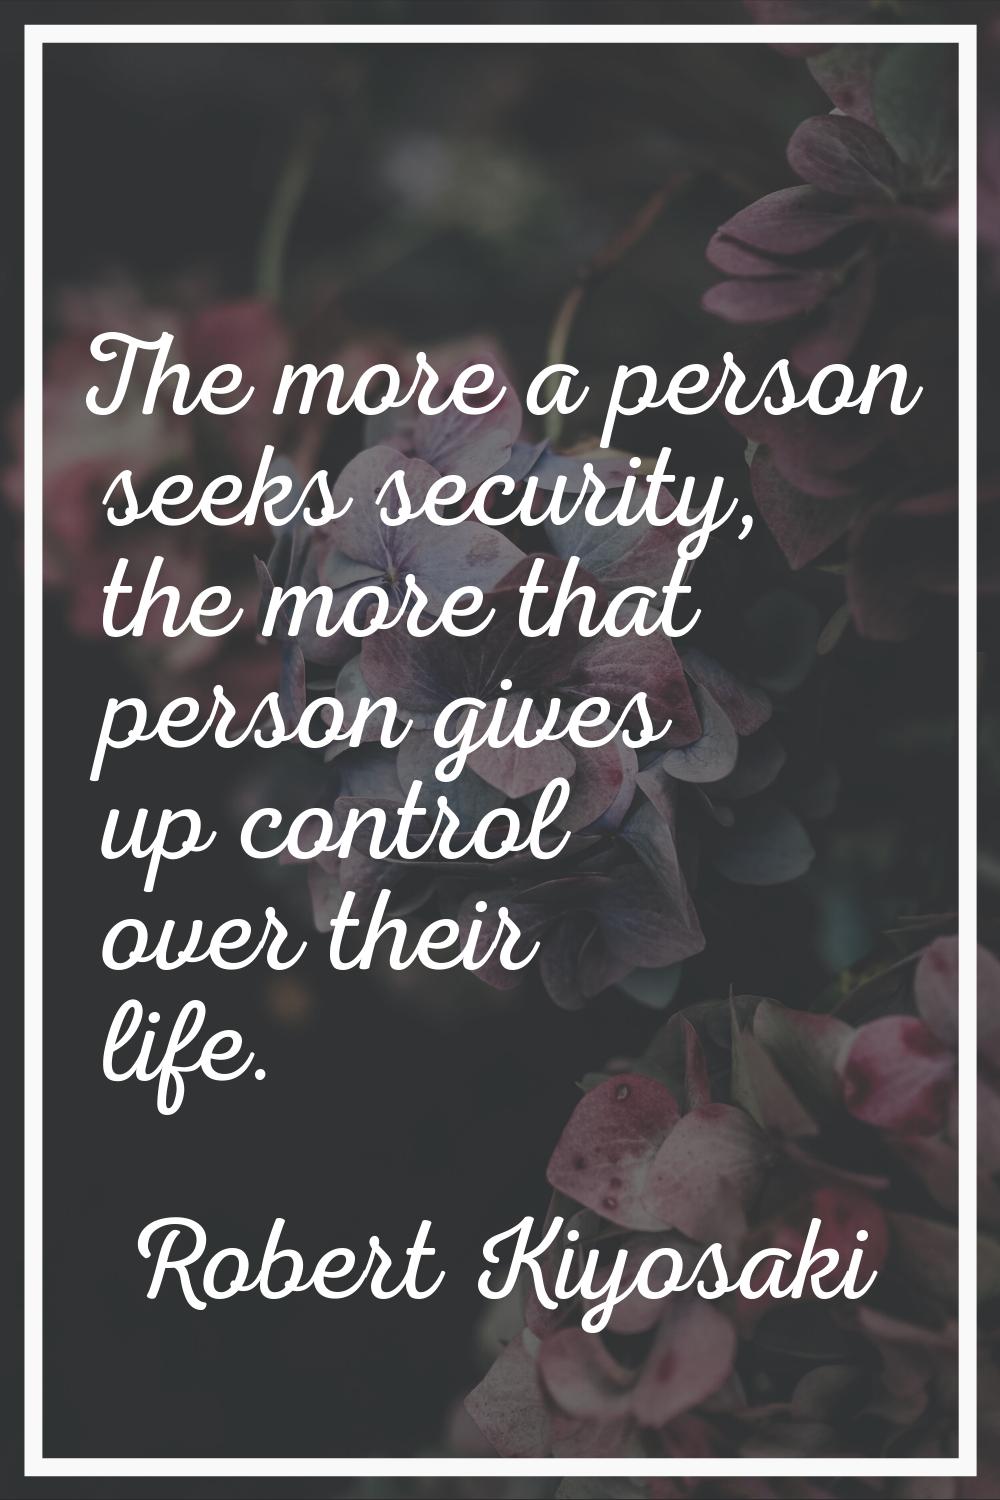 The more a person seeks security, the more that person gives up control over their life.